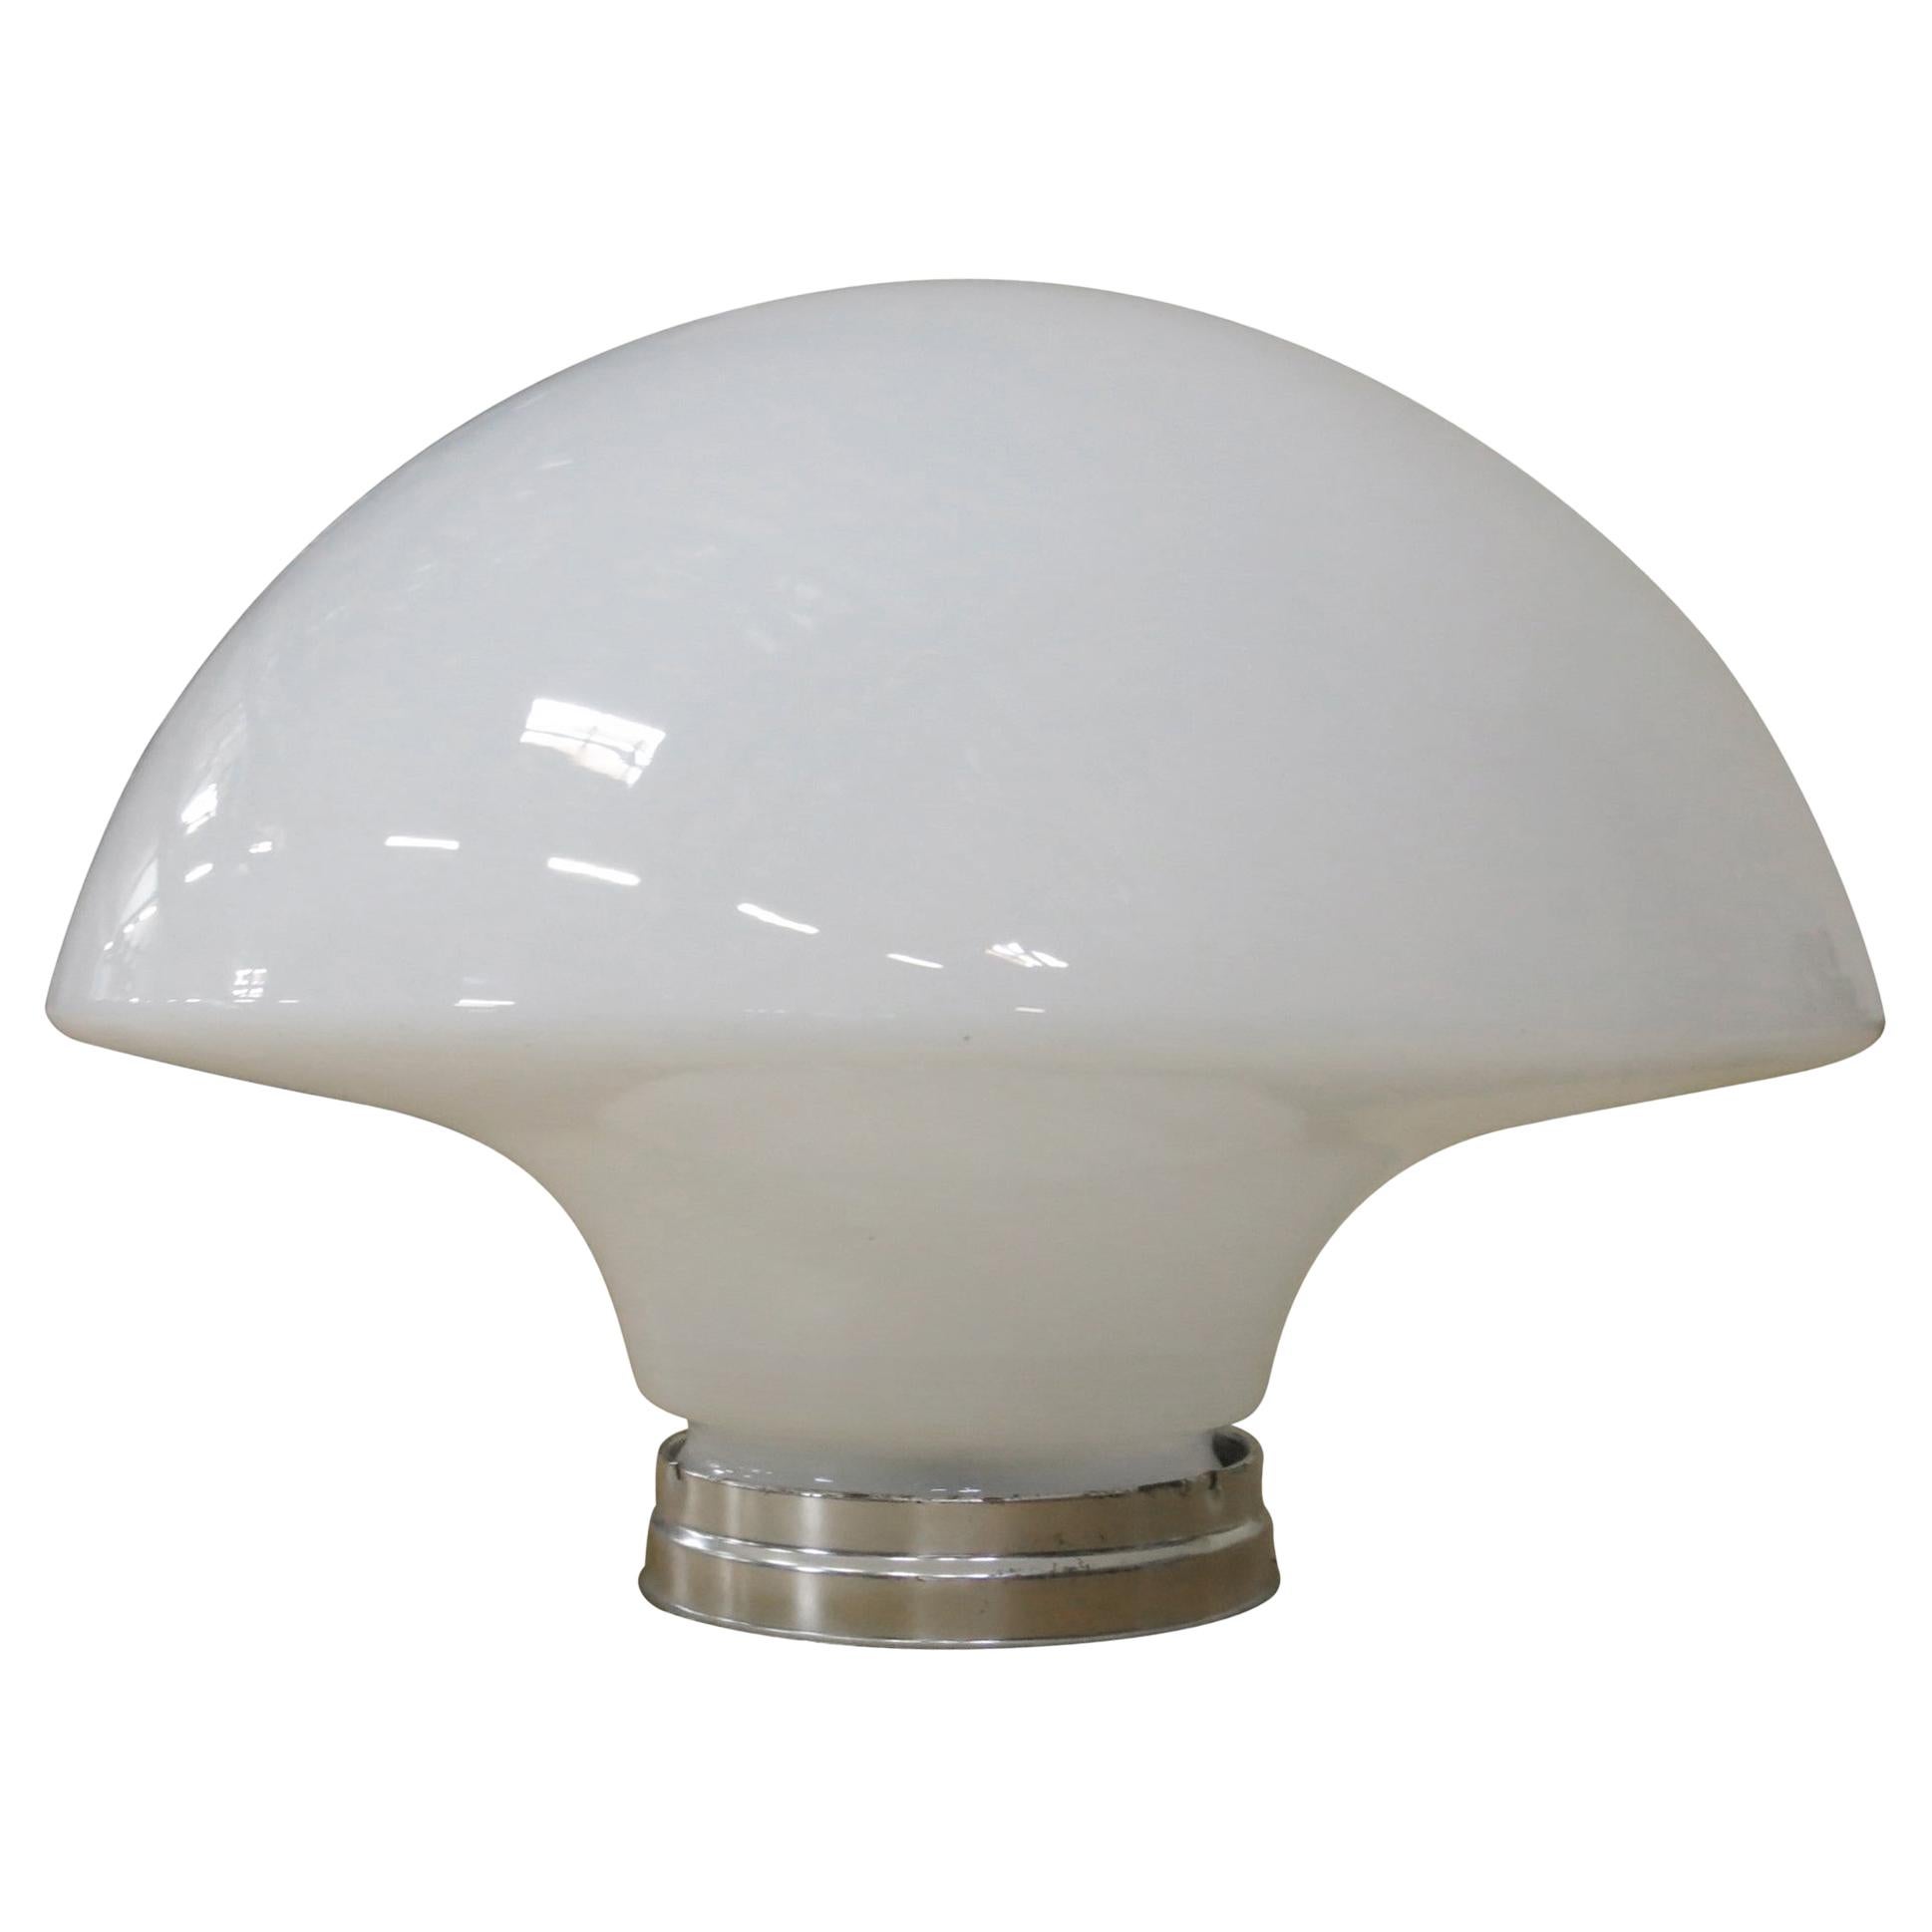 Large Art Deco Milk Glass Ceiling Mounted Globe with Fitter